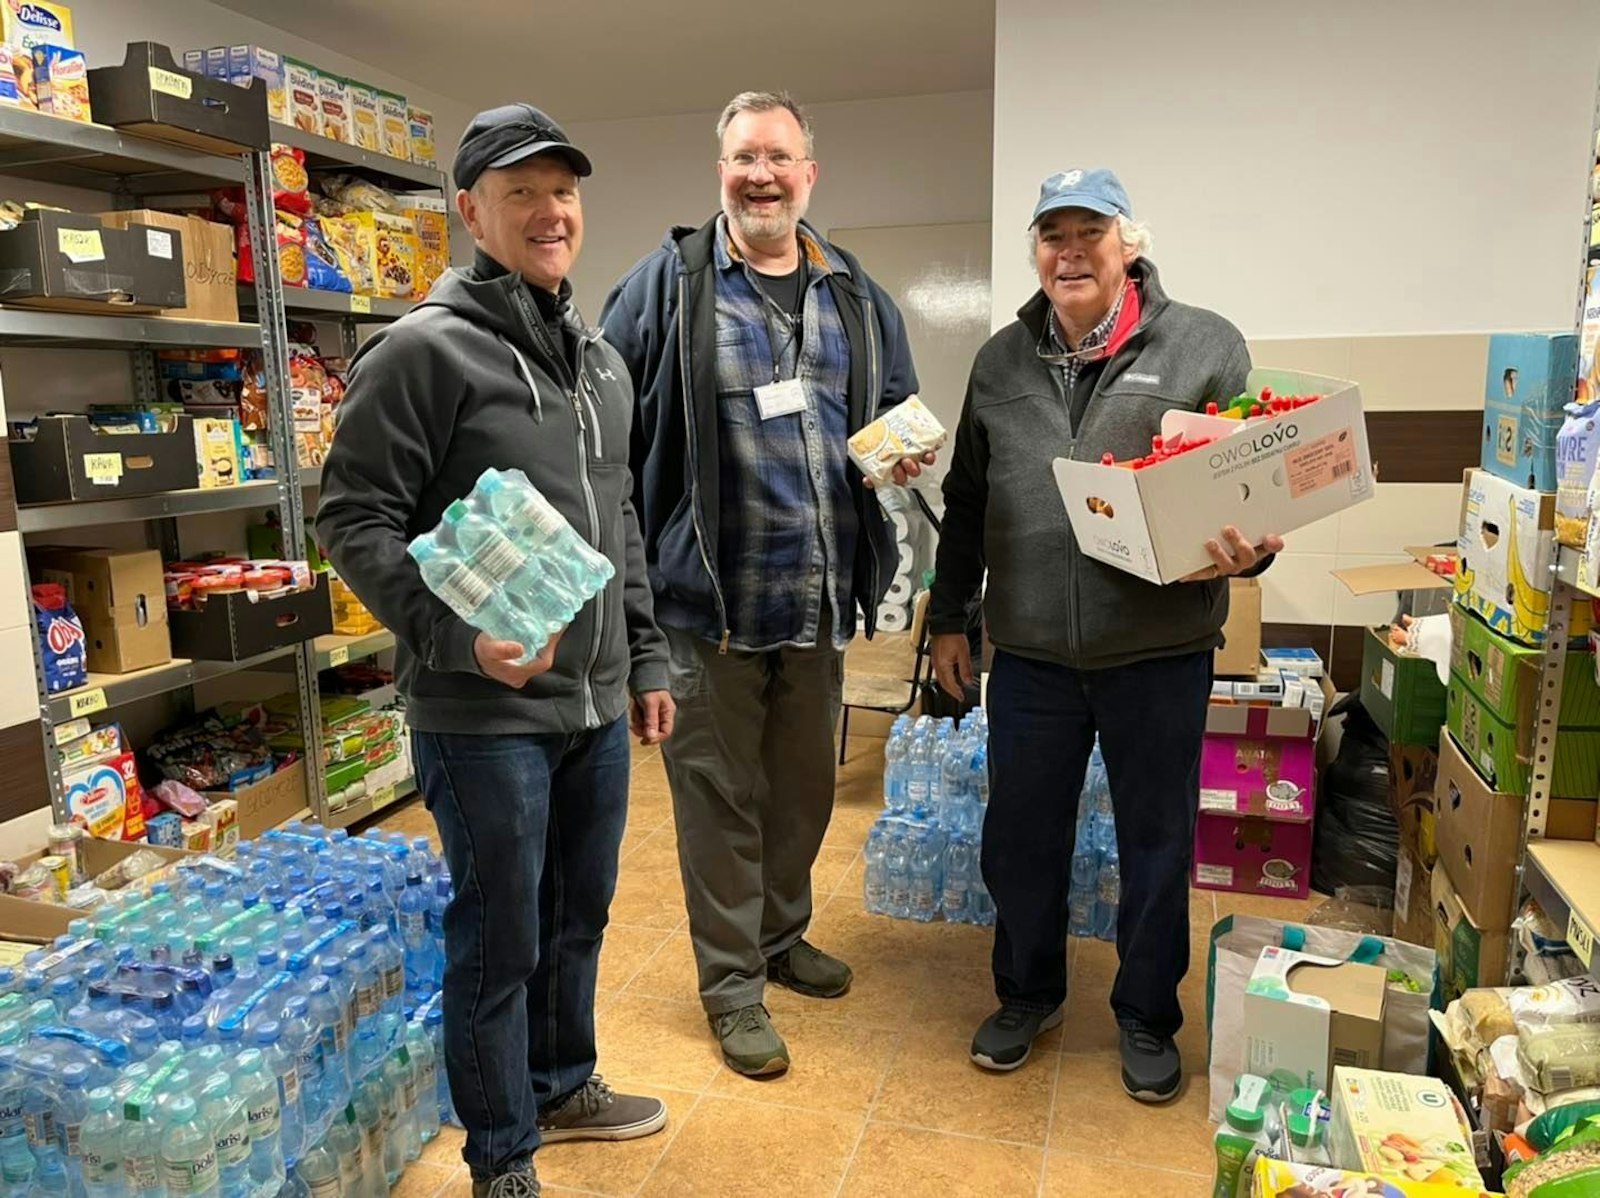 Volunteers from St. Clare of Montefalco Parish sort items at one of the refugee processing centers. The needs change daily, with new refugees arriving and departing almost constantly.